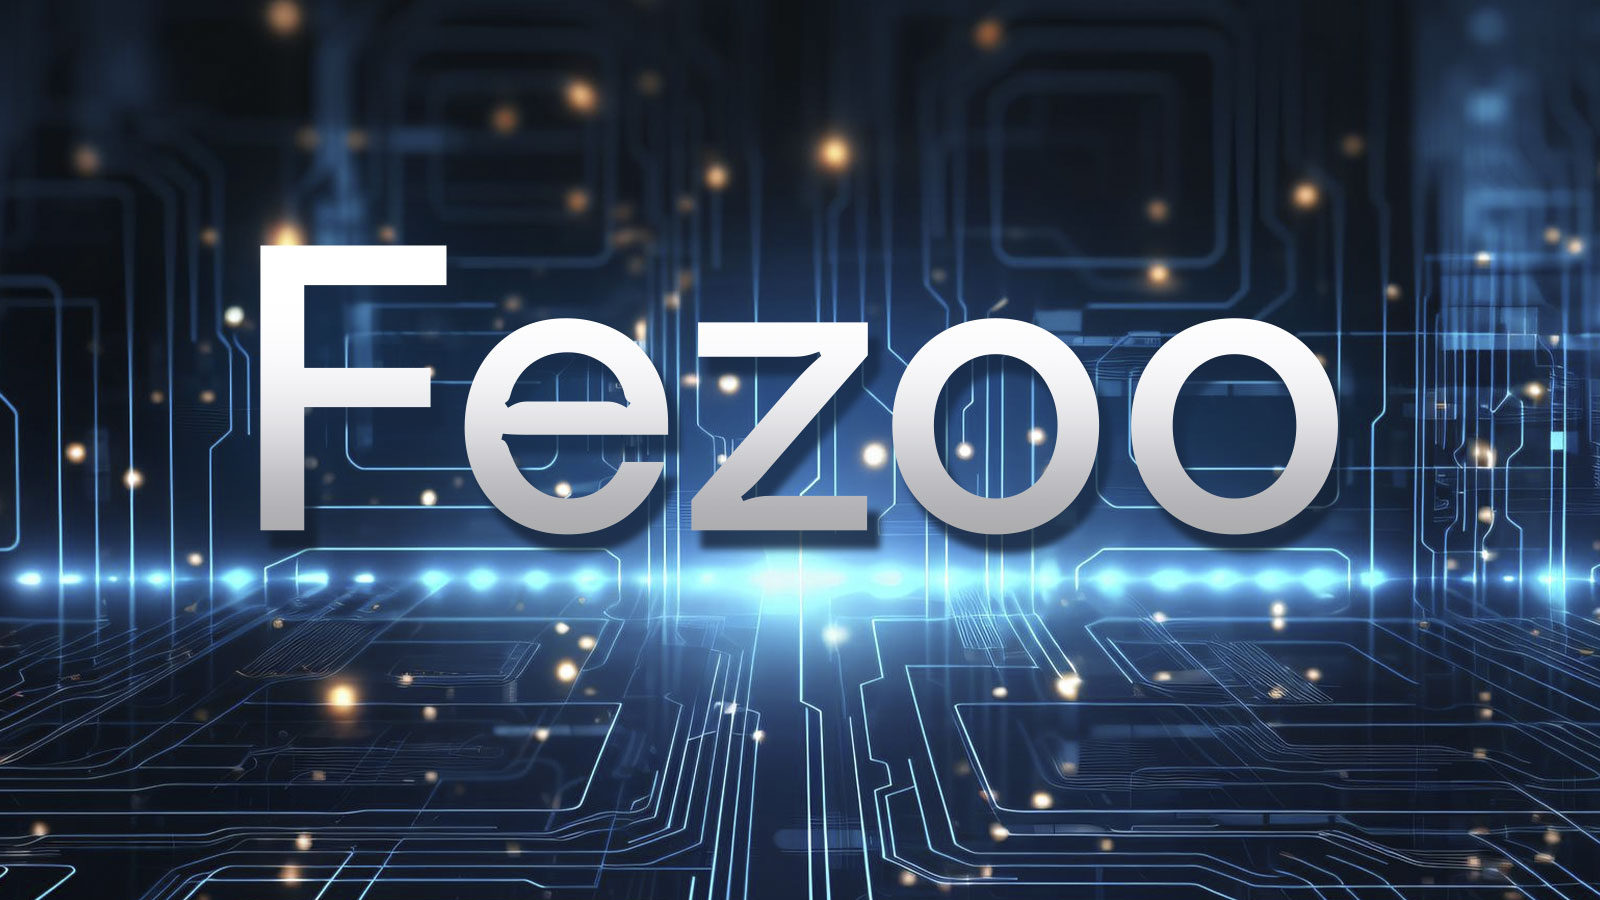 Fezoo (FEZ) Cryptocurrency Token Pre-Sale Welcomed by Altcoin Experts in April as Dogwifhat (WIF), The Graph (GRT) Cryptos Hit New Metrics Highs